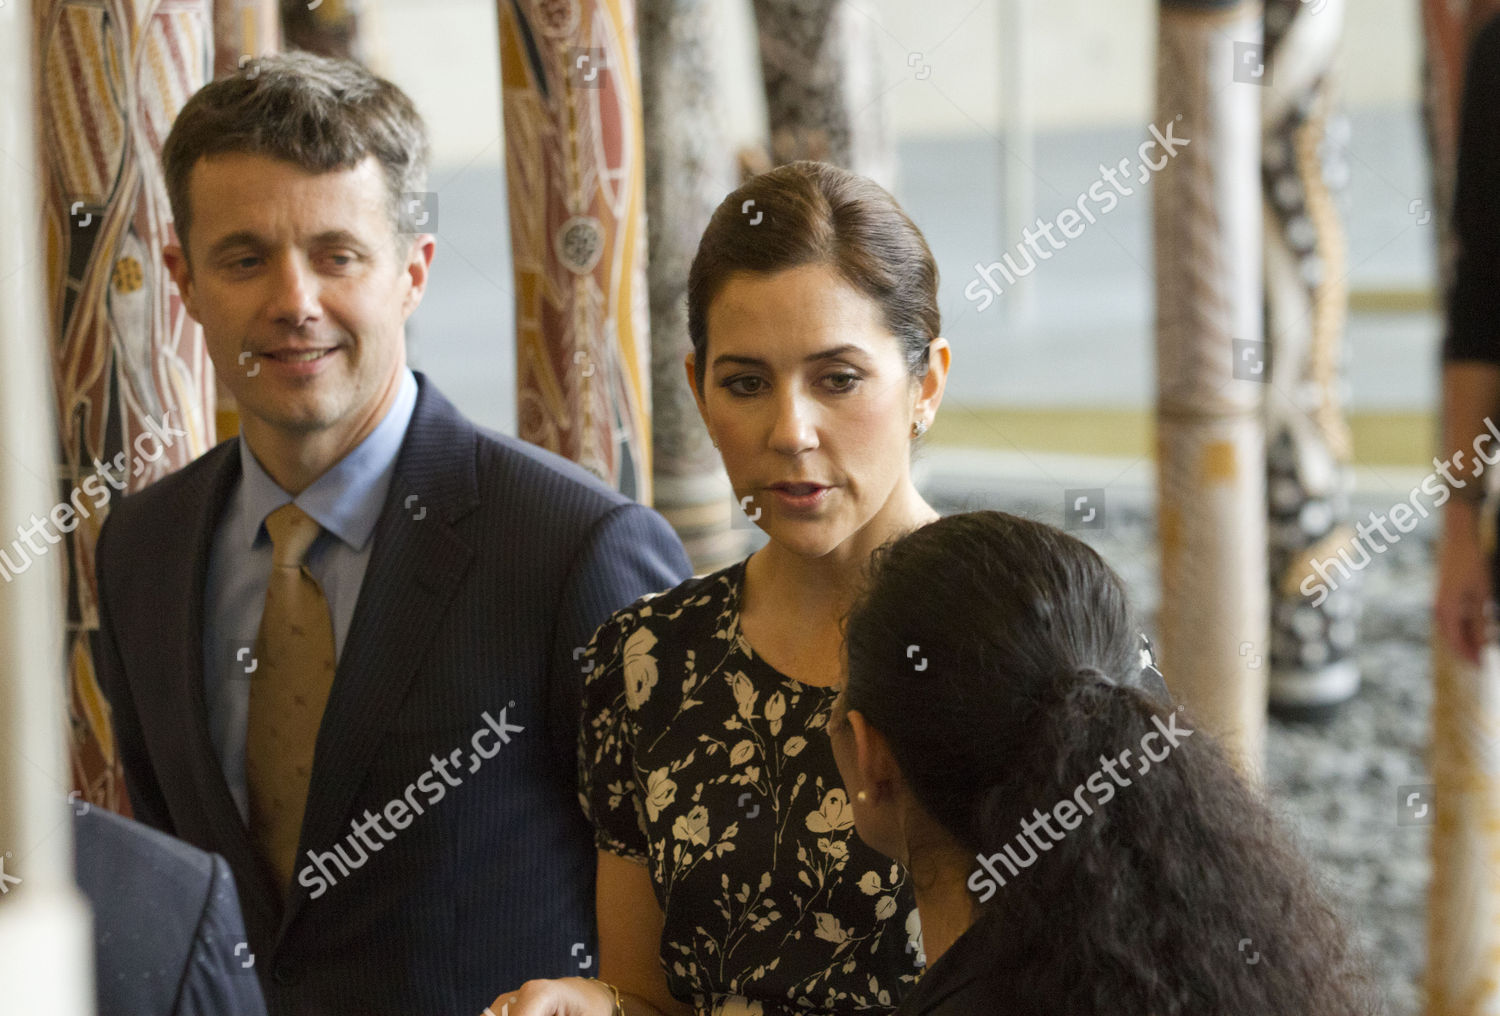 crown-prince-frederik-and-crown-princess-mary-official-visit-to-canberra-australia-shutterstock-editorial-1499426v.jpg